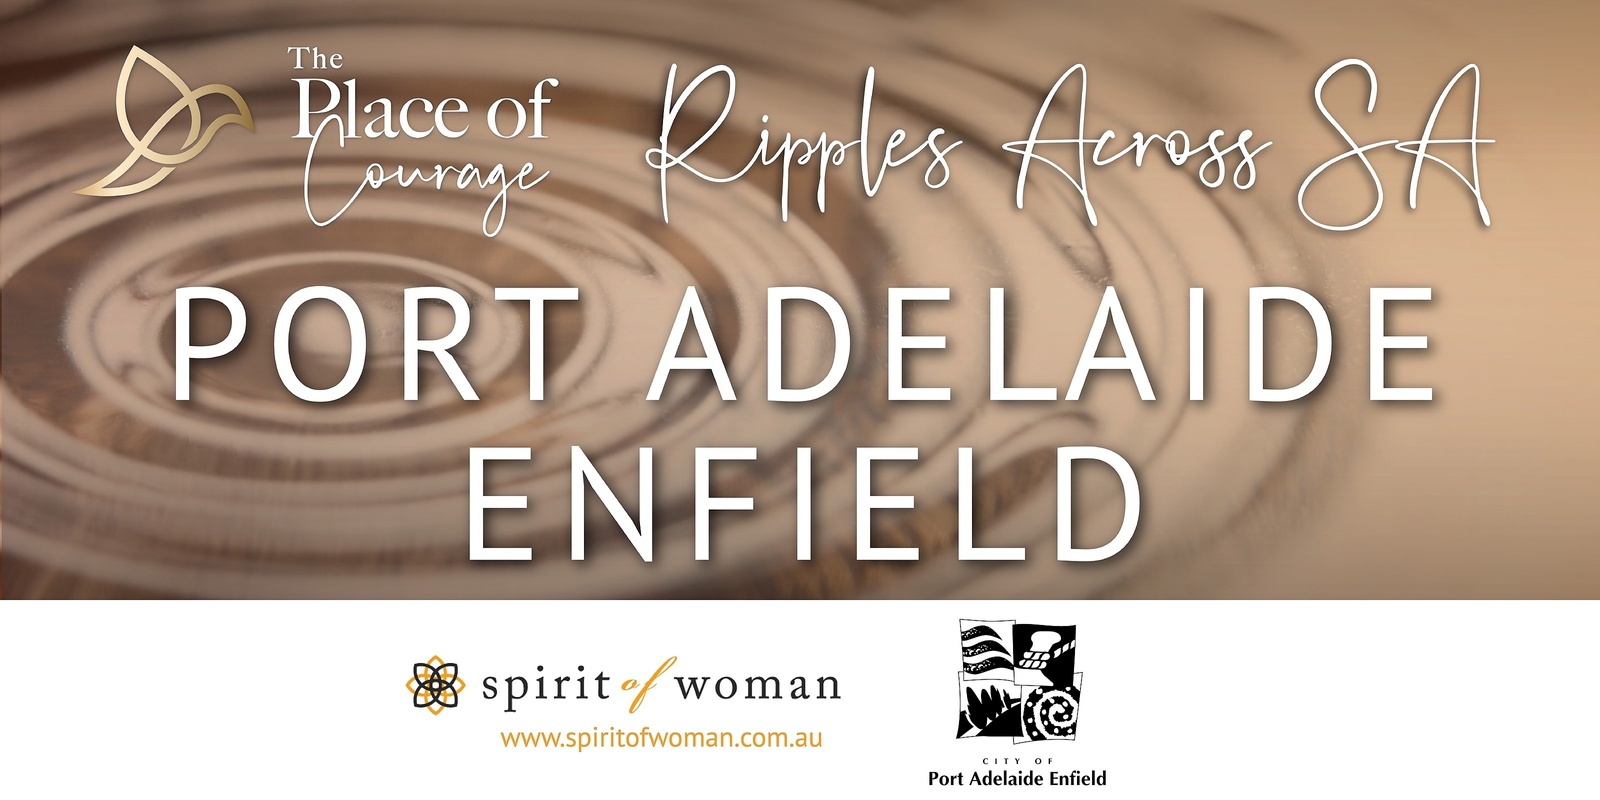 Banner image for The Place of Courage - Ripples Across SA - City of Port Adelaide Enfield Ripple launch